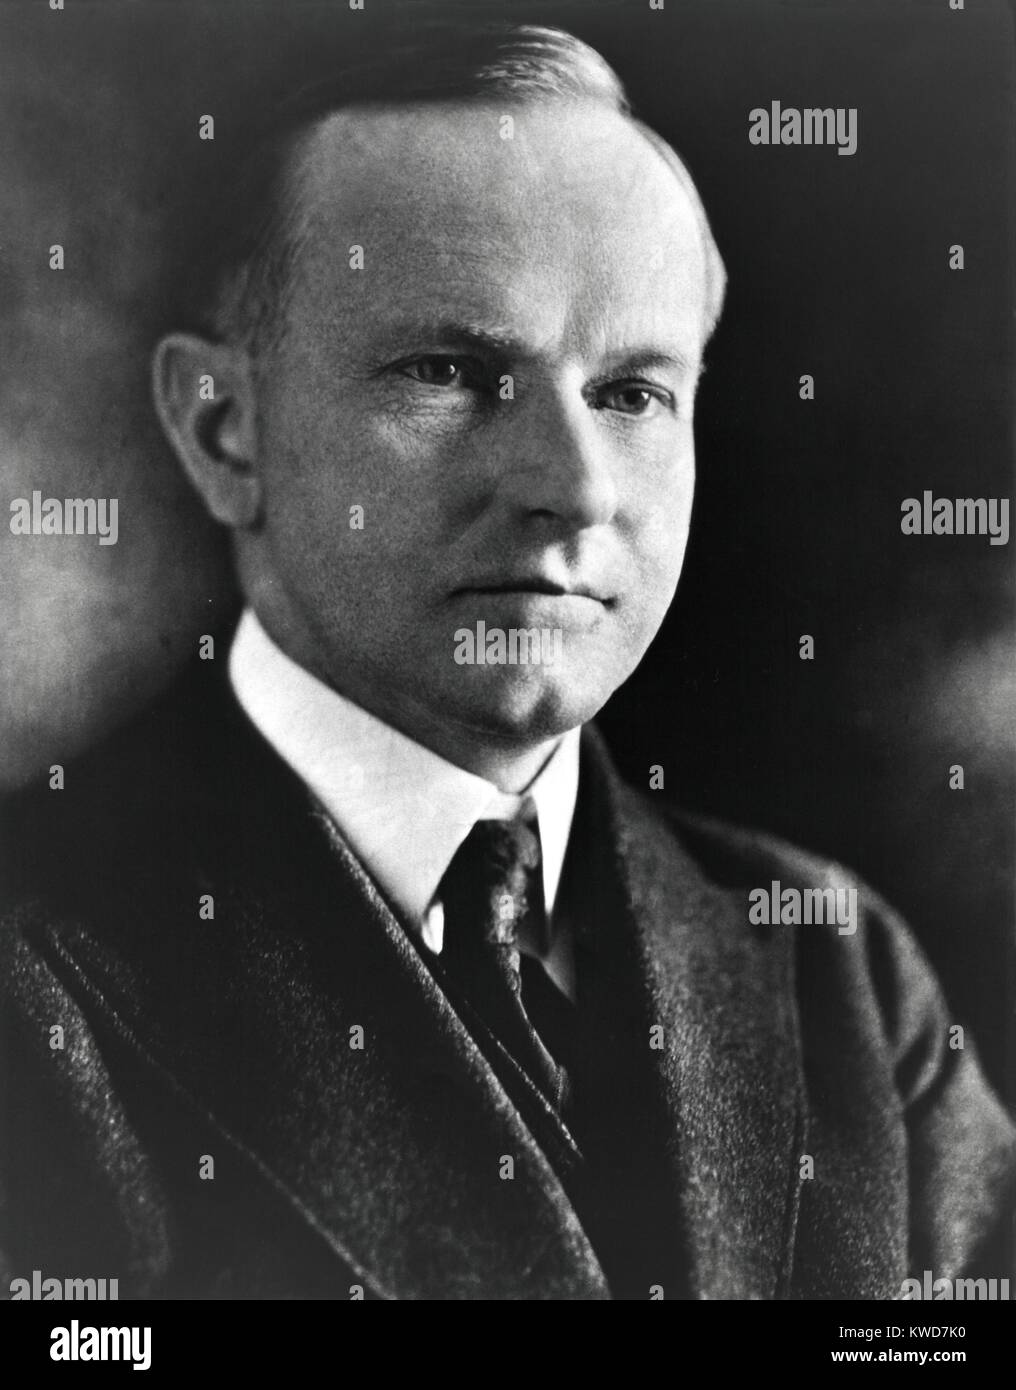 President Calvin Coolidge. Ca. 1923-1928. From 1907 to 1920, Coolidge worked his way up Massachusetts State politics to election as Governor in 1918. (BSLOC 2015 15 91) Stock Photo